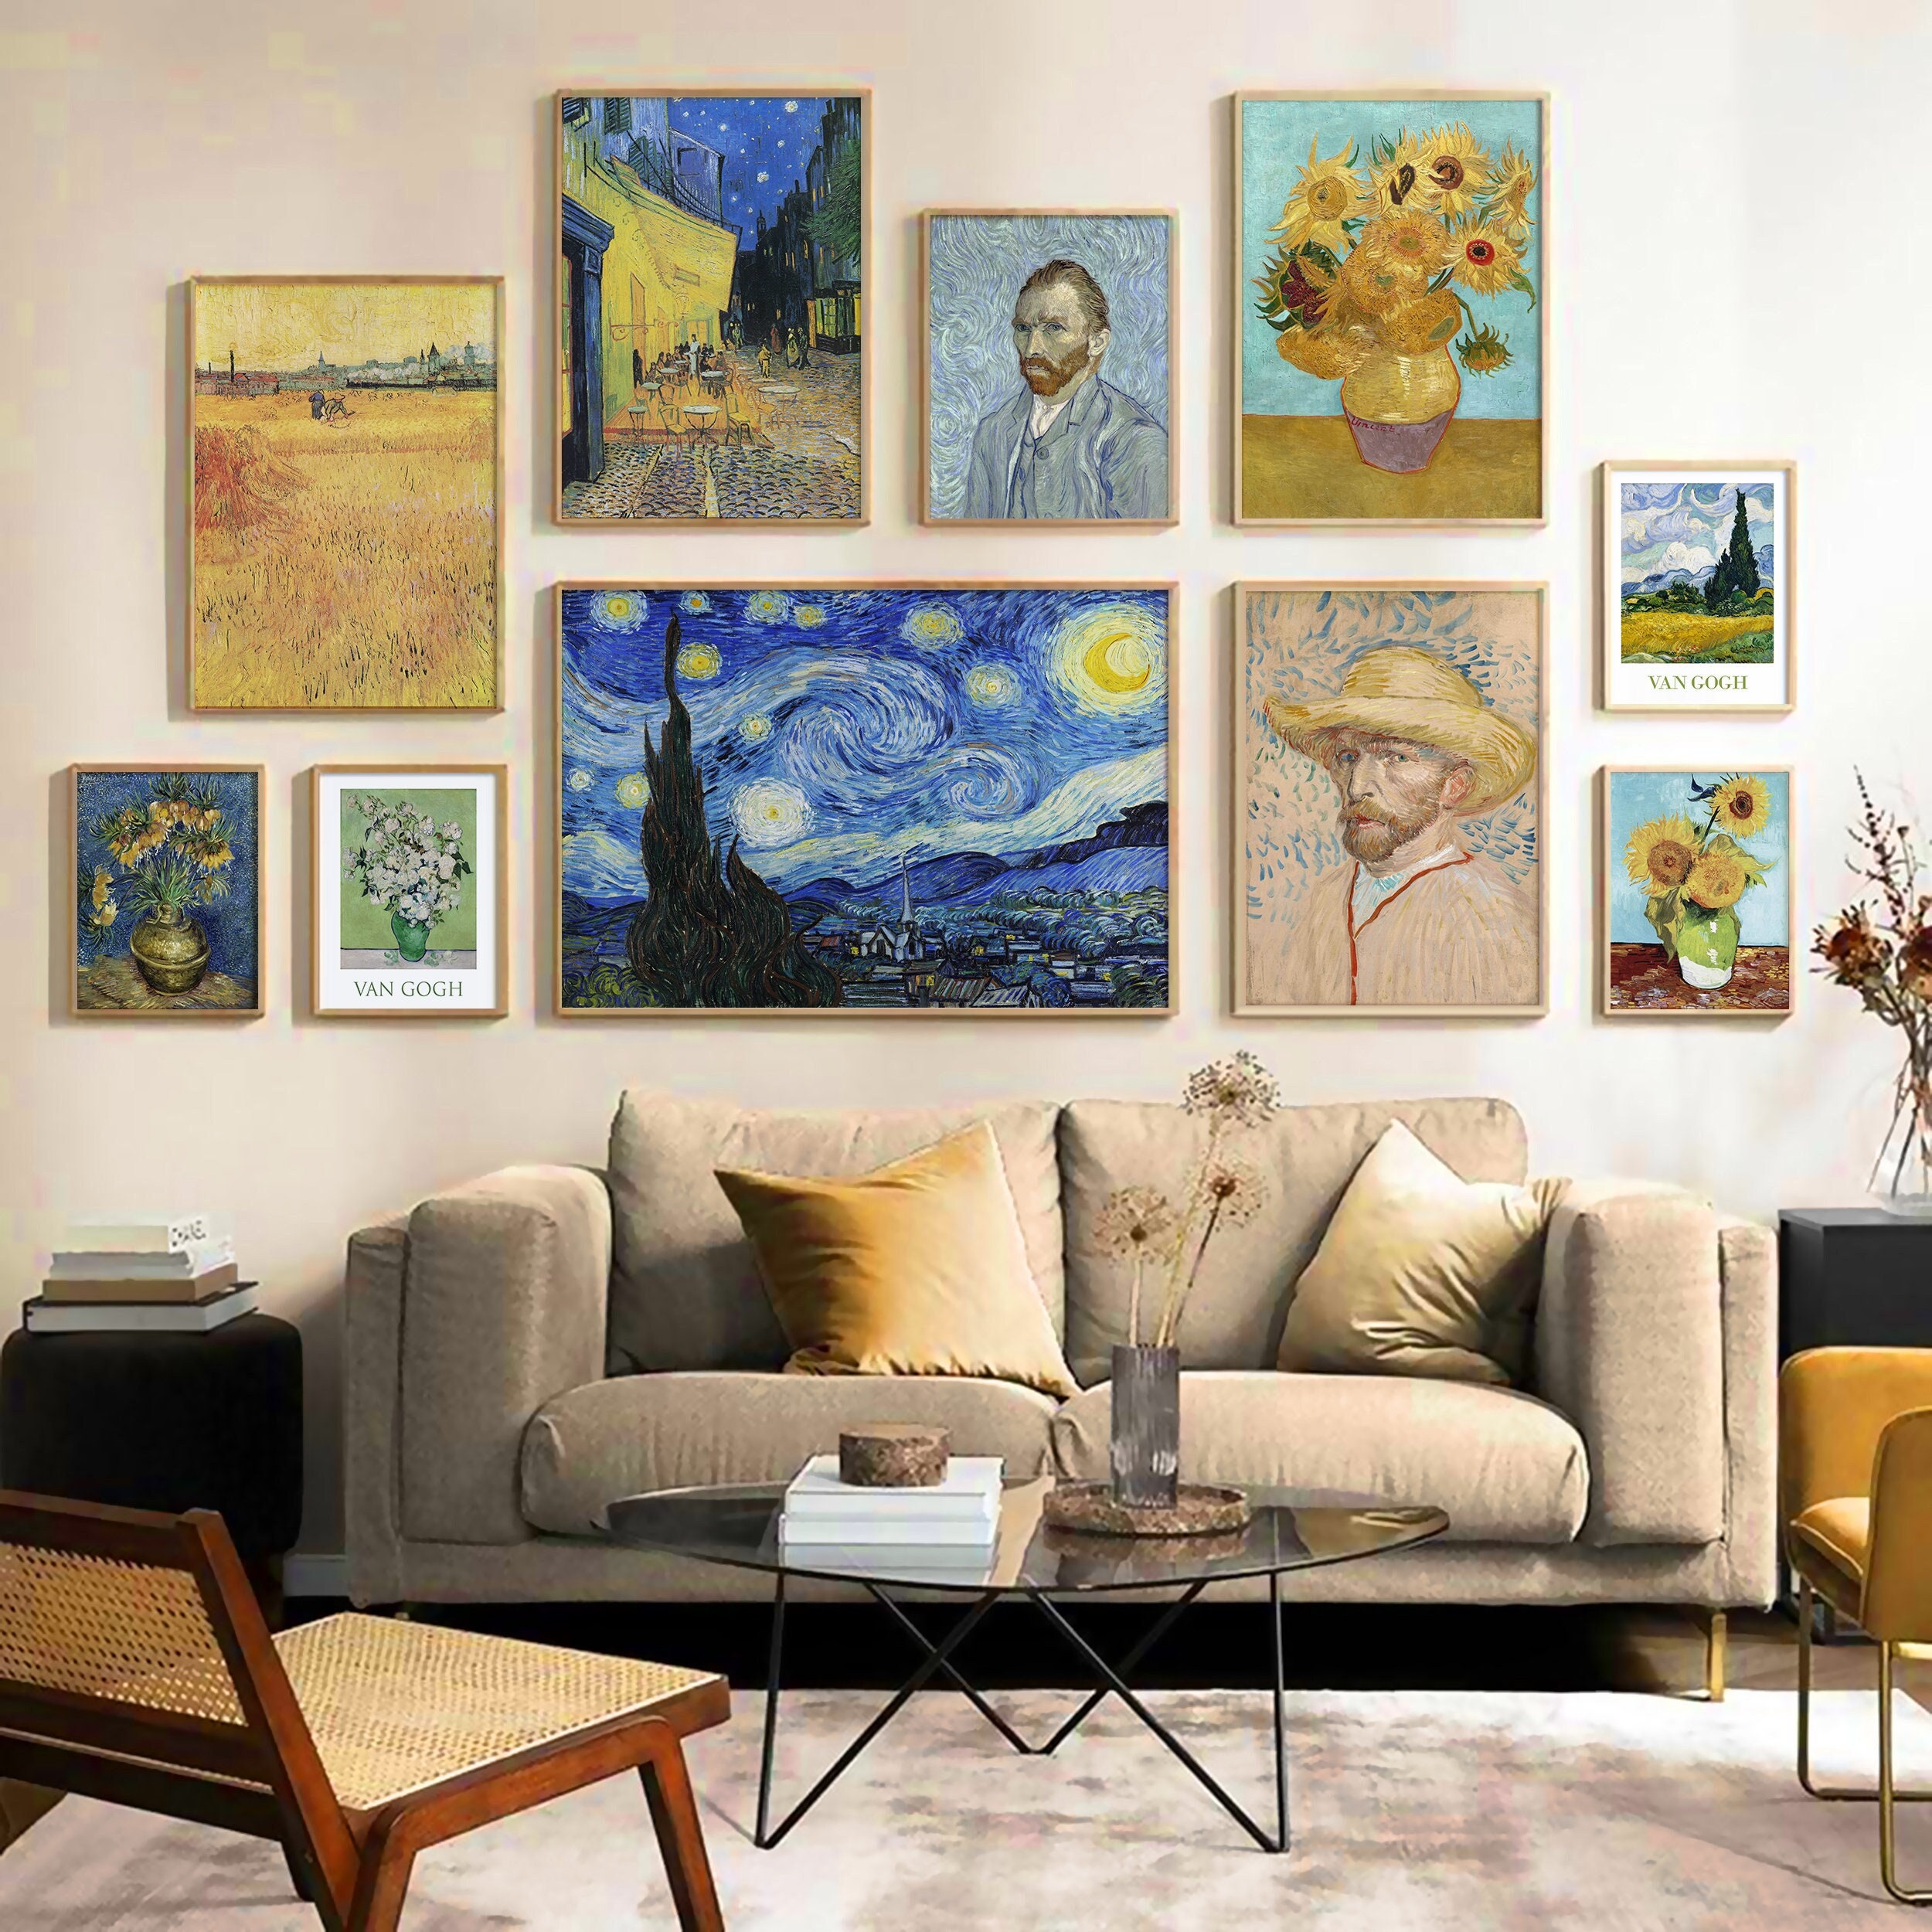 Gallery Wall Art Set of 10 Eclectic Wall Art Van Gogh image picture